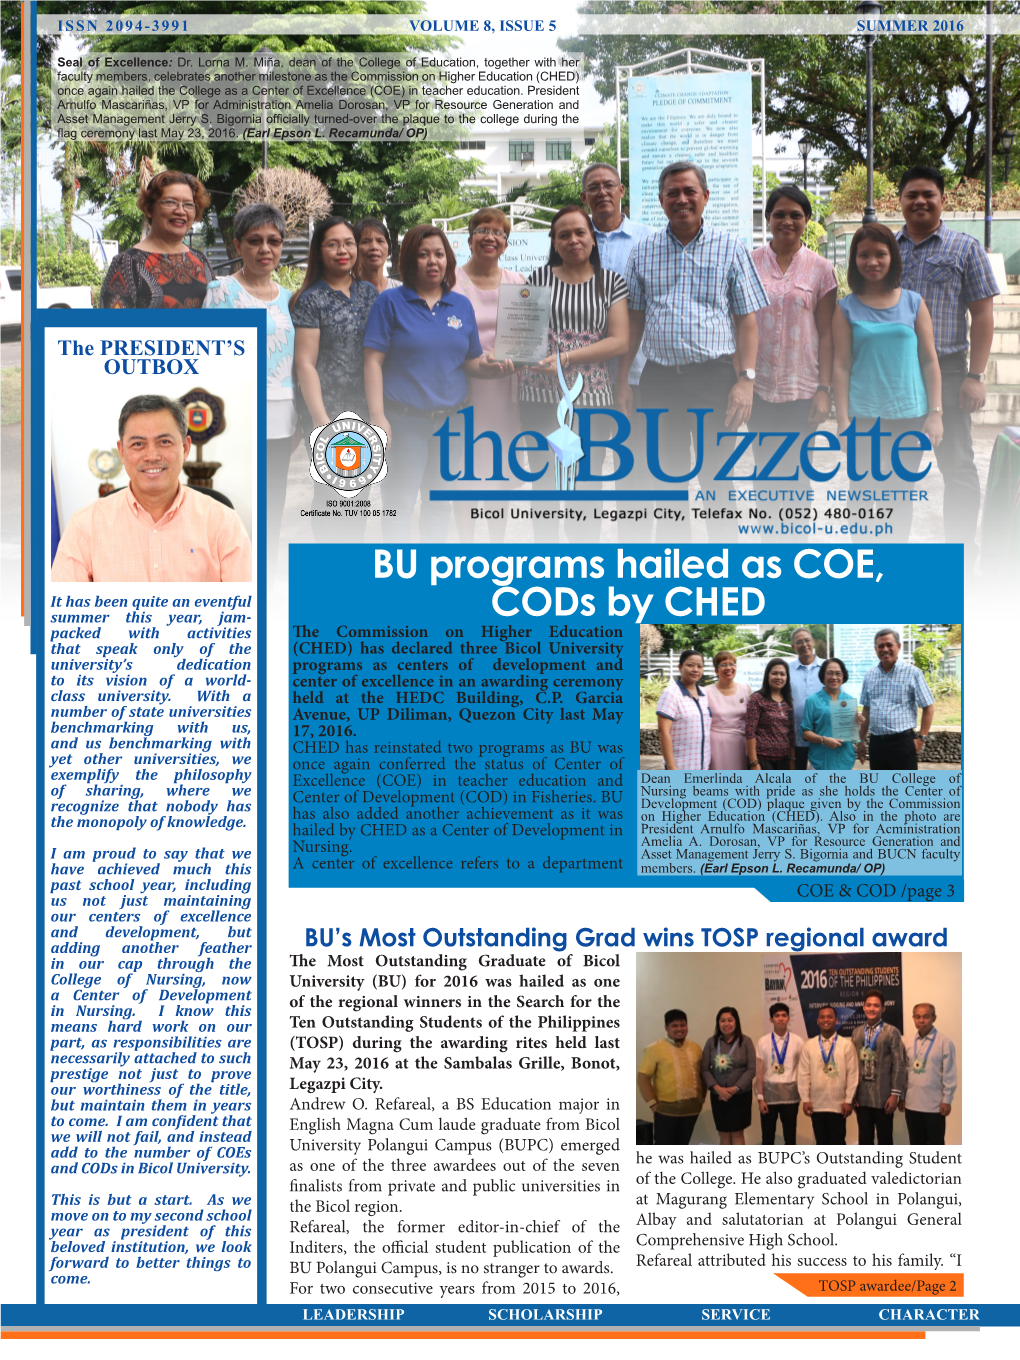 BU Programs Hailed As COE, Cods by CHED